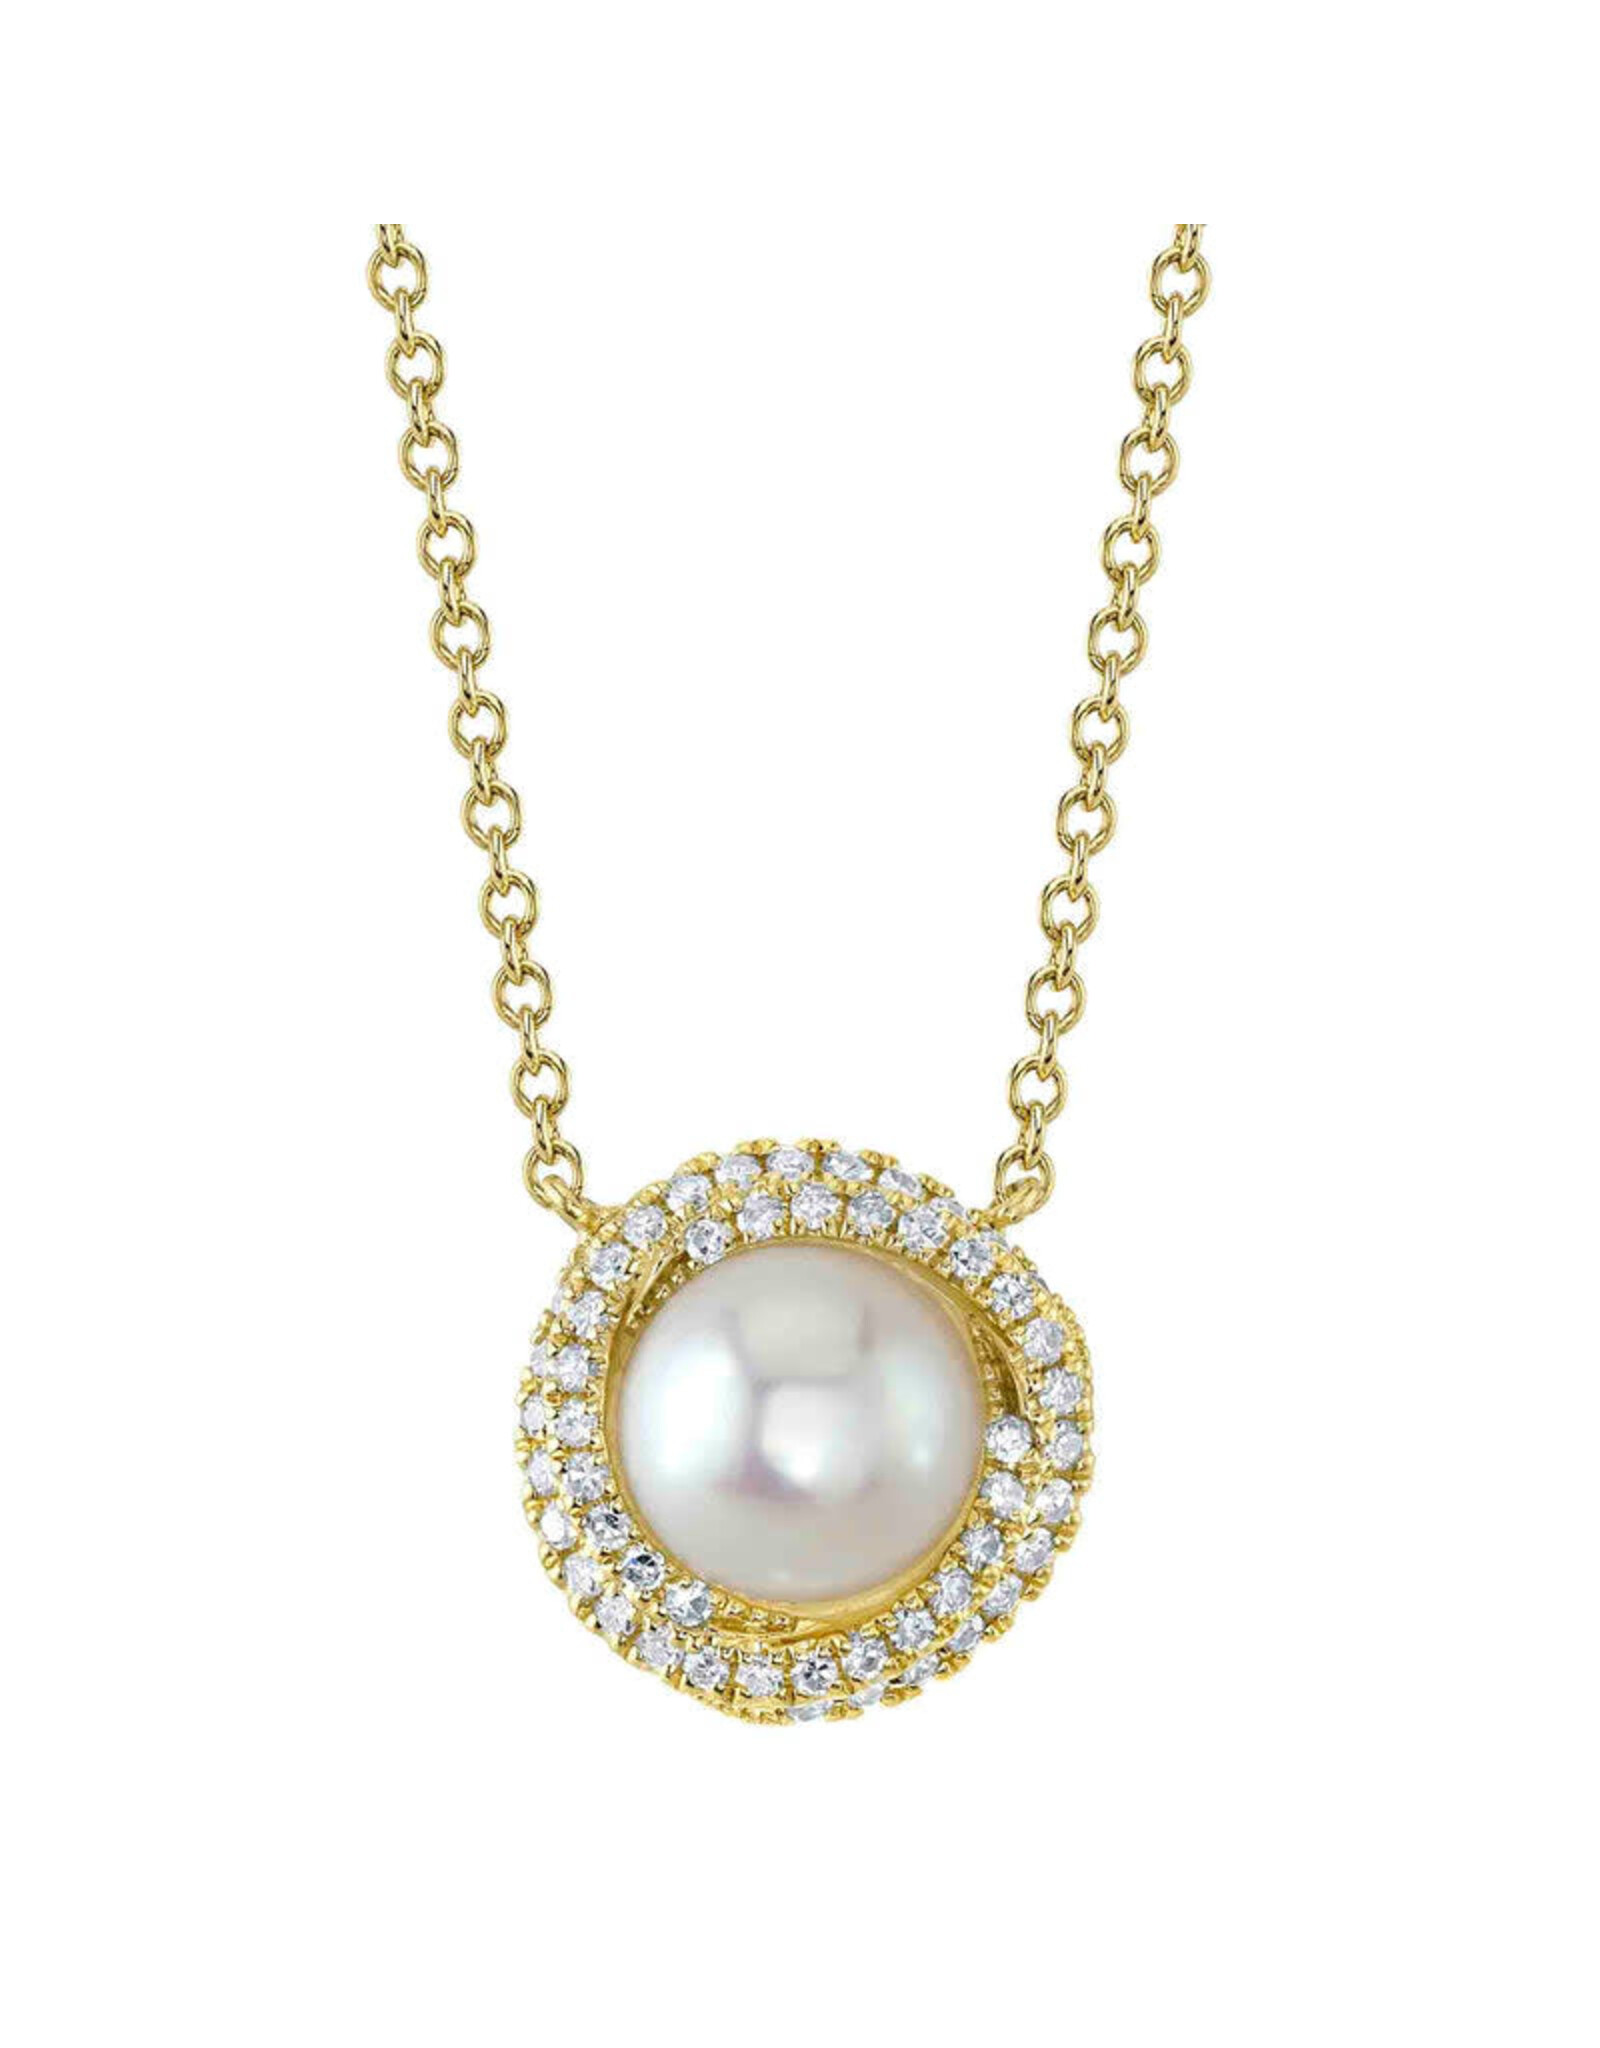 14K Yellow Gold Pearl and Diamond Necklace, P: 6.5mm, D: 0.13ct